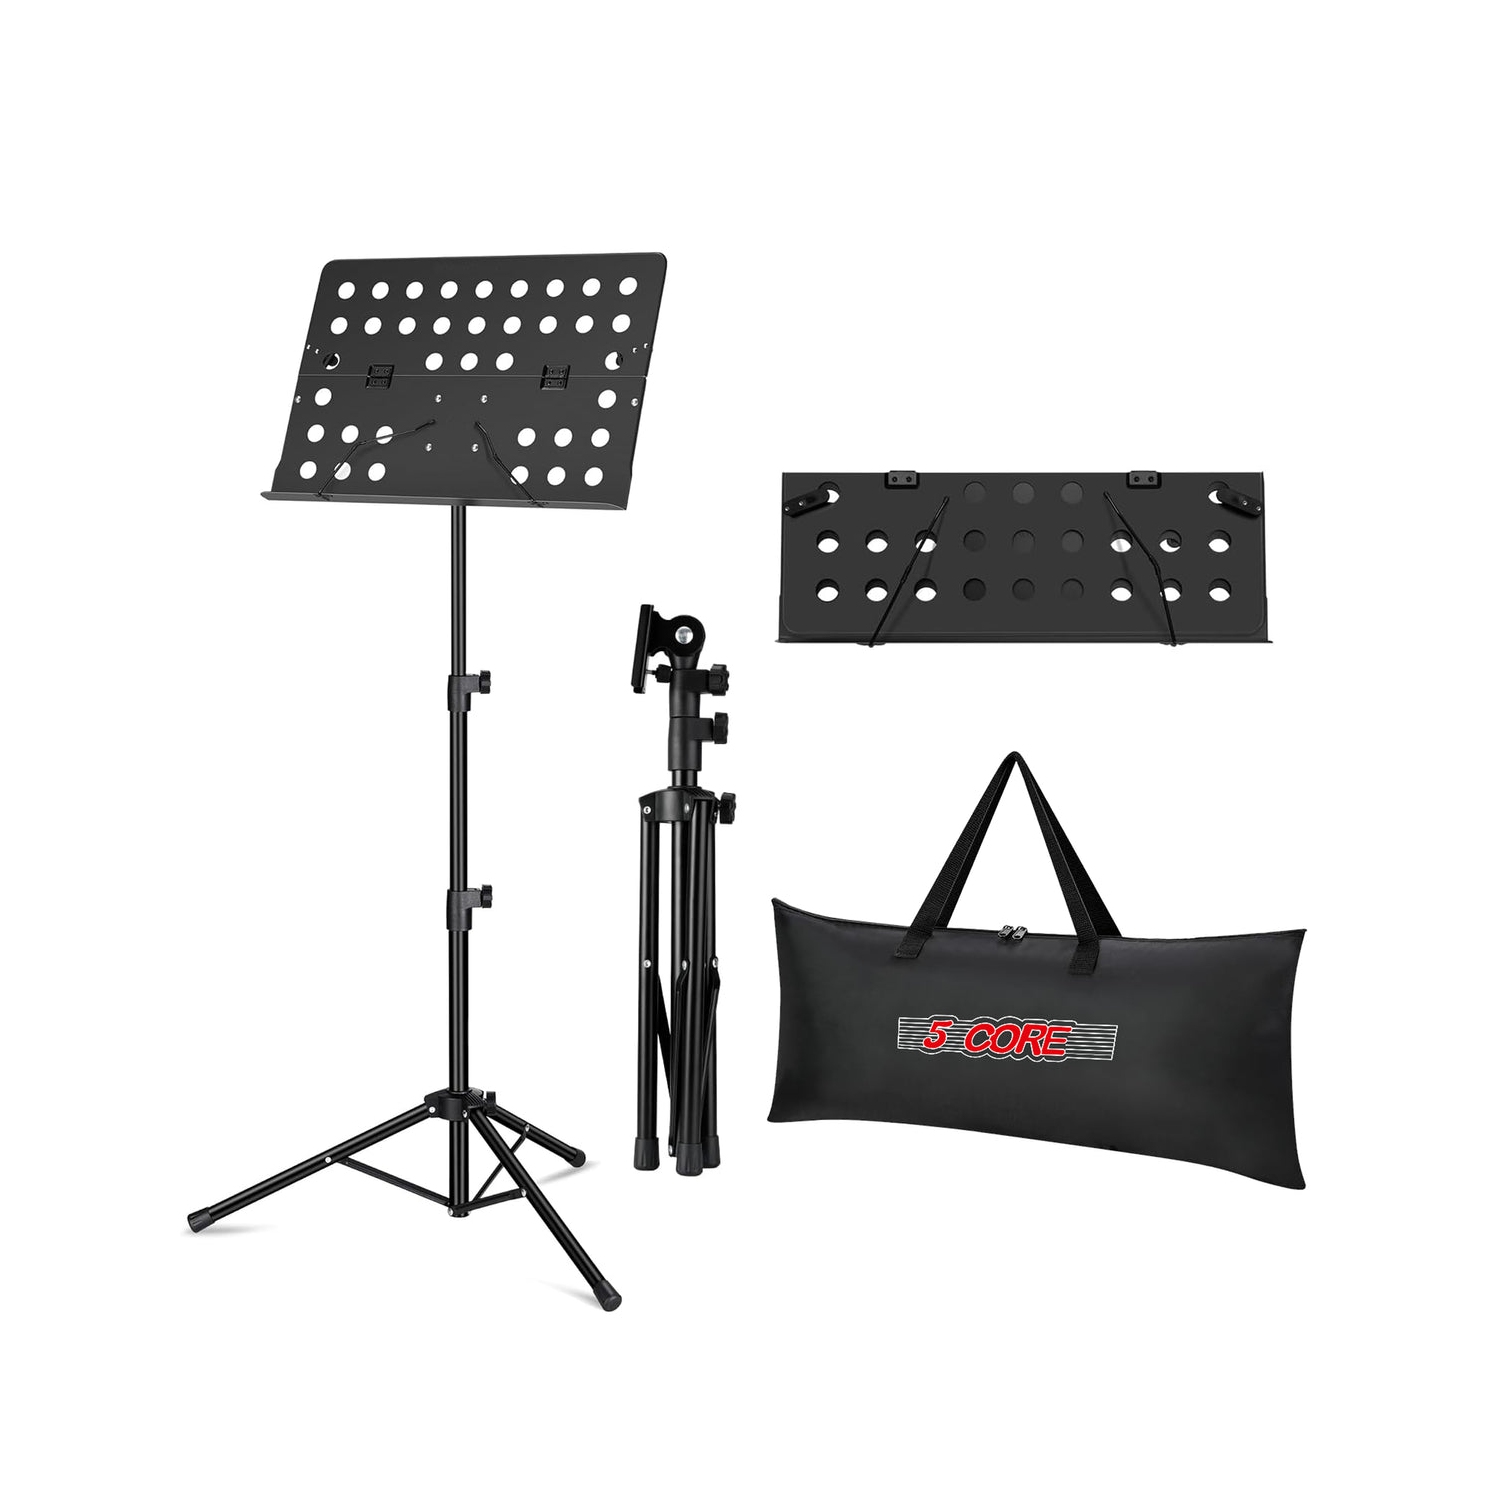 5 Core Music Stand for Sheet Music Heavy Duty Folding Portable Stands Light Weight Book Clip Holder Music Accessories And Travel Carry Bag - MUS FLD HD